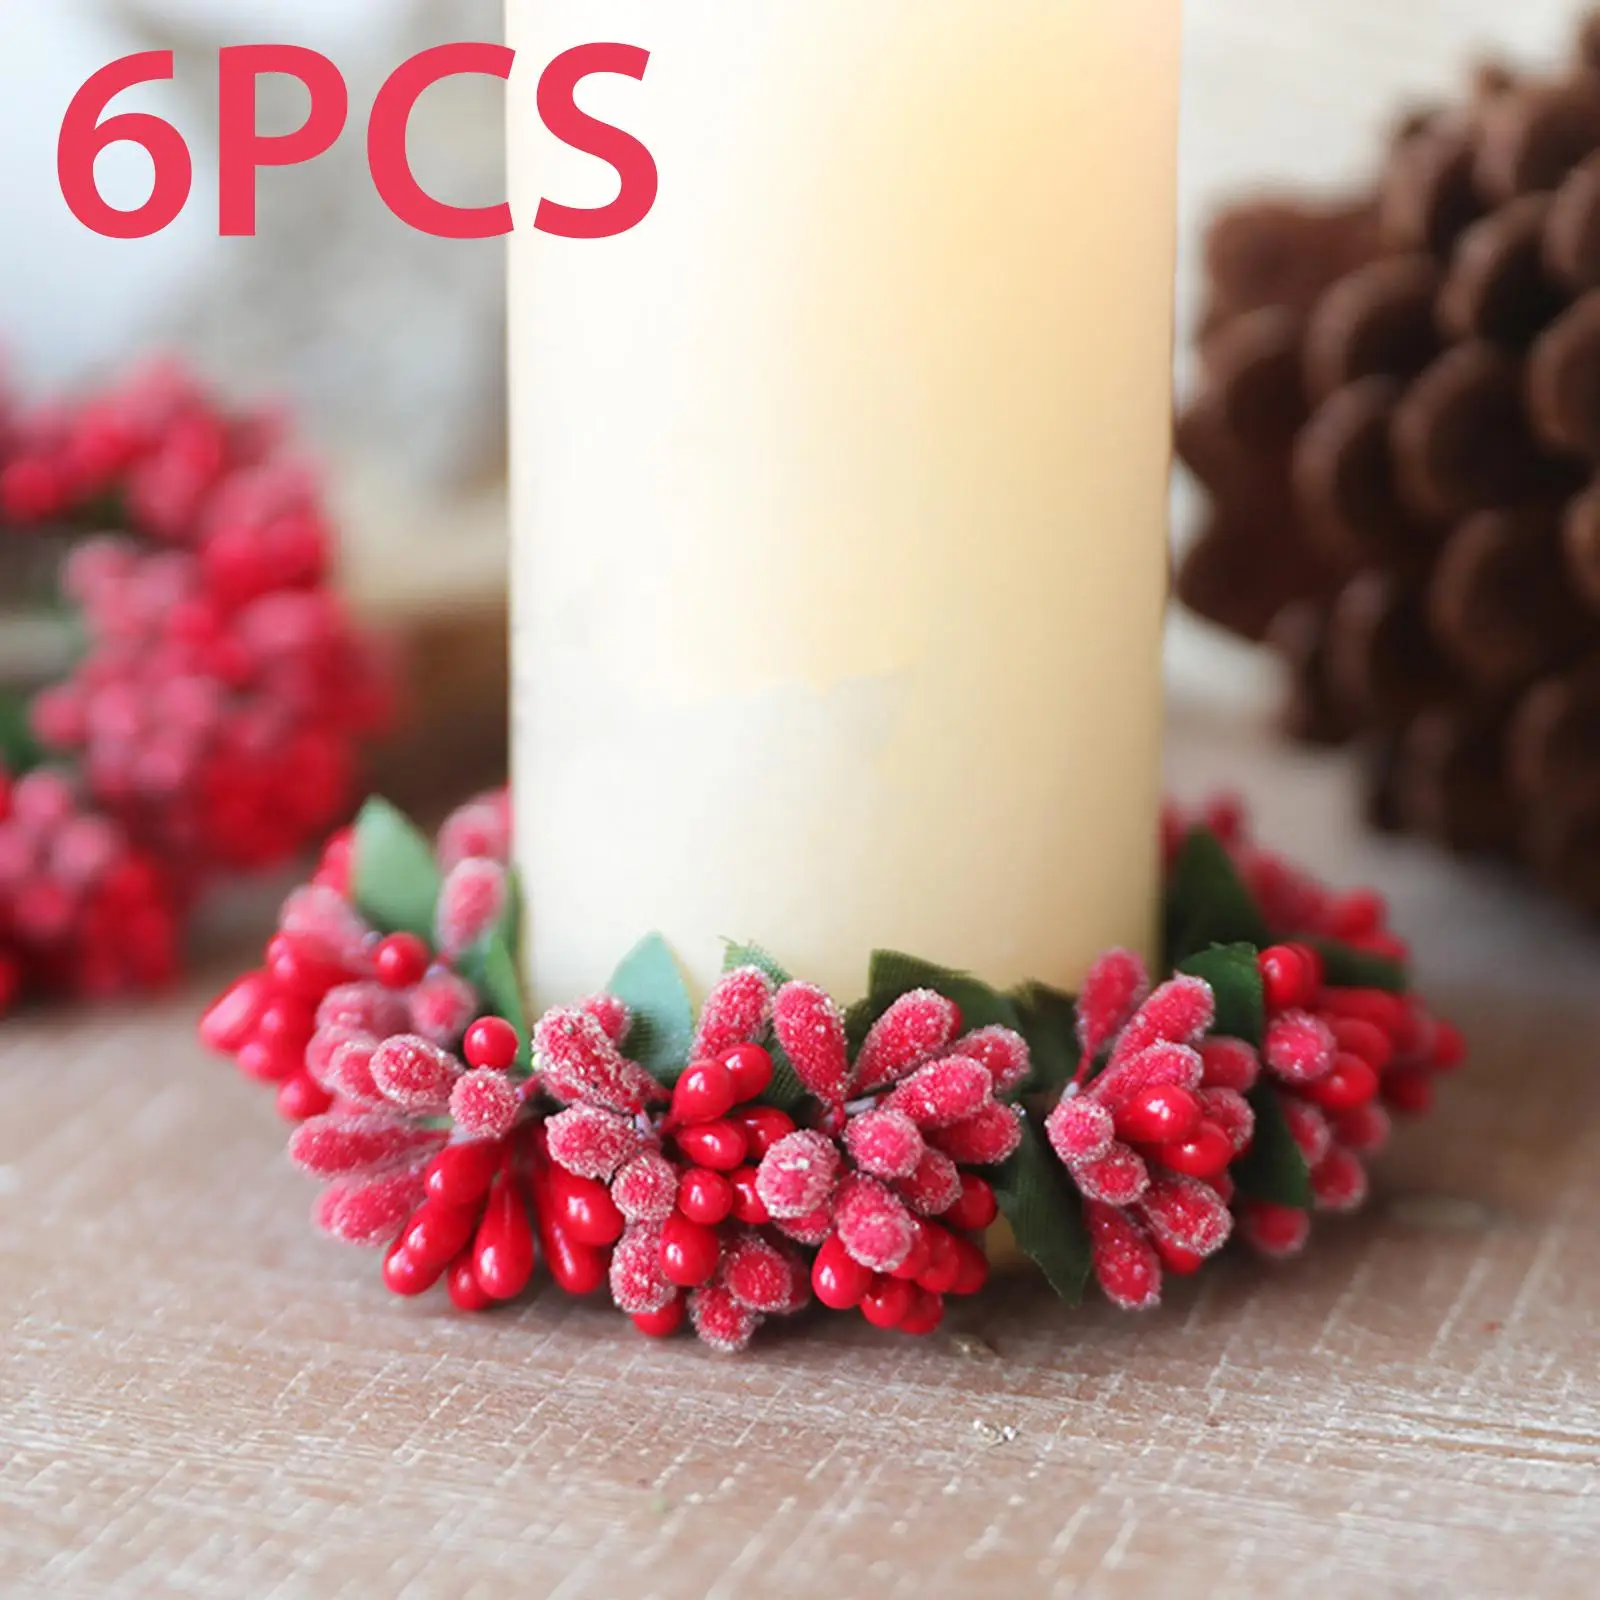 6Pcs Red Berries Candle Ring Wreath Greenery Wreath Pillar Candleholder for Living Room Easter Table Thanksgiving Decorations